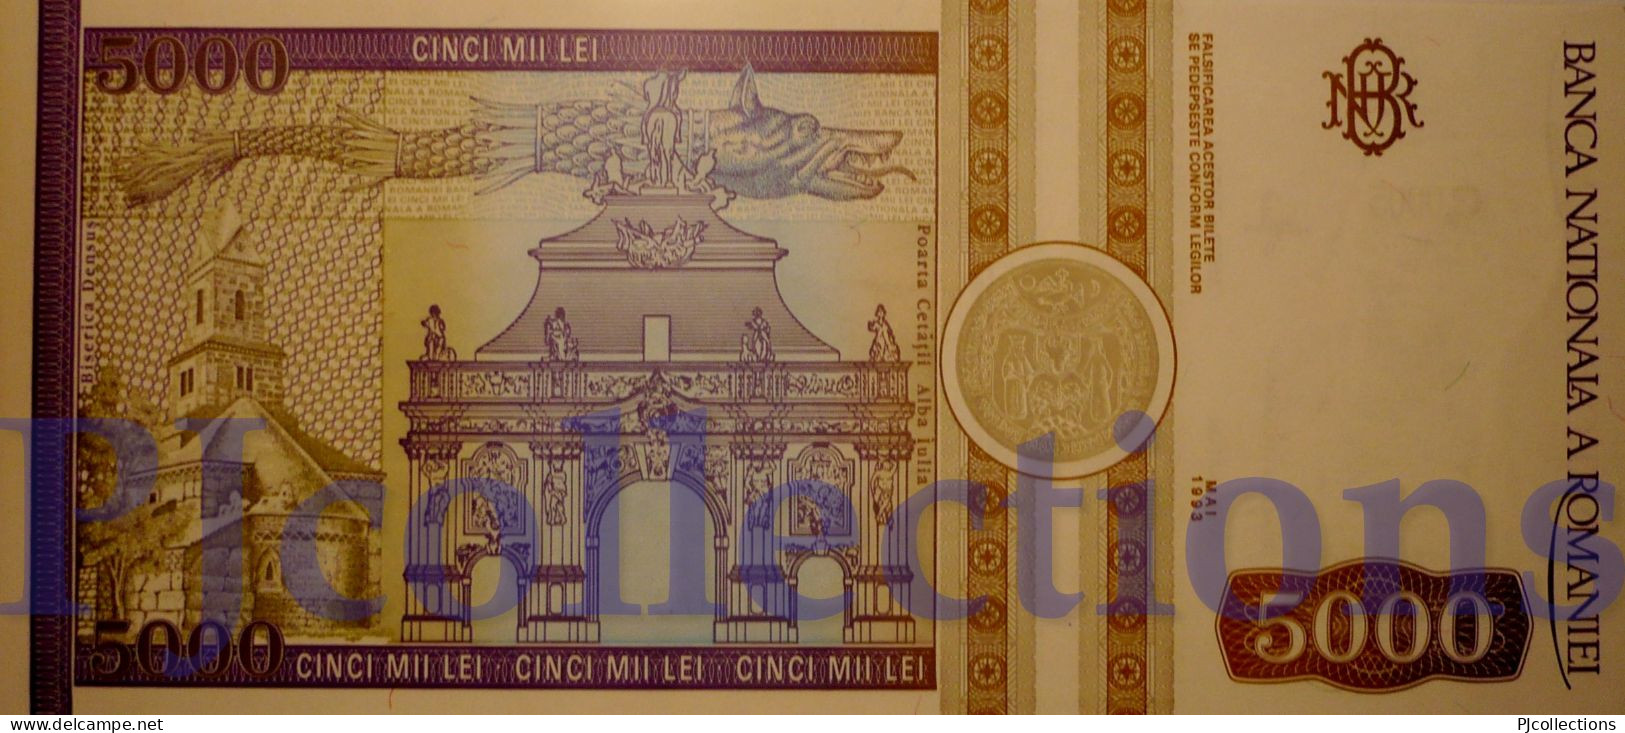 ROMANIA 5000 LEI 1993 PICK 104a UNC LOW & GOOD SERIAL NUMBER "000900" - Roumanie